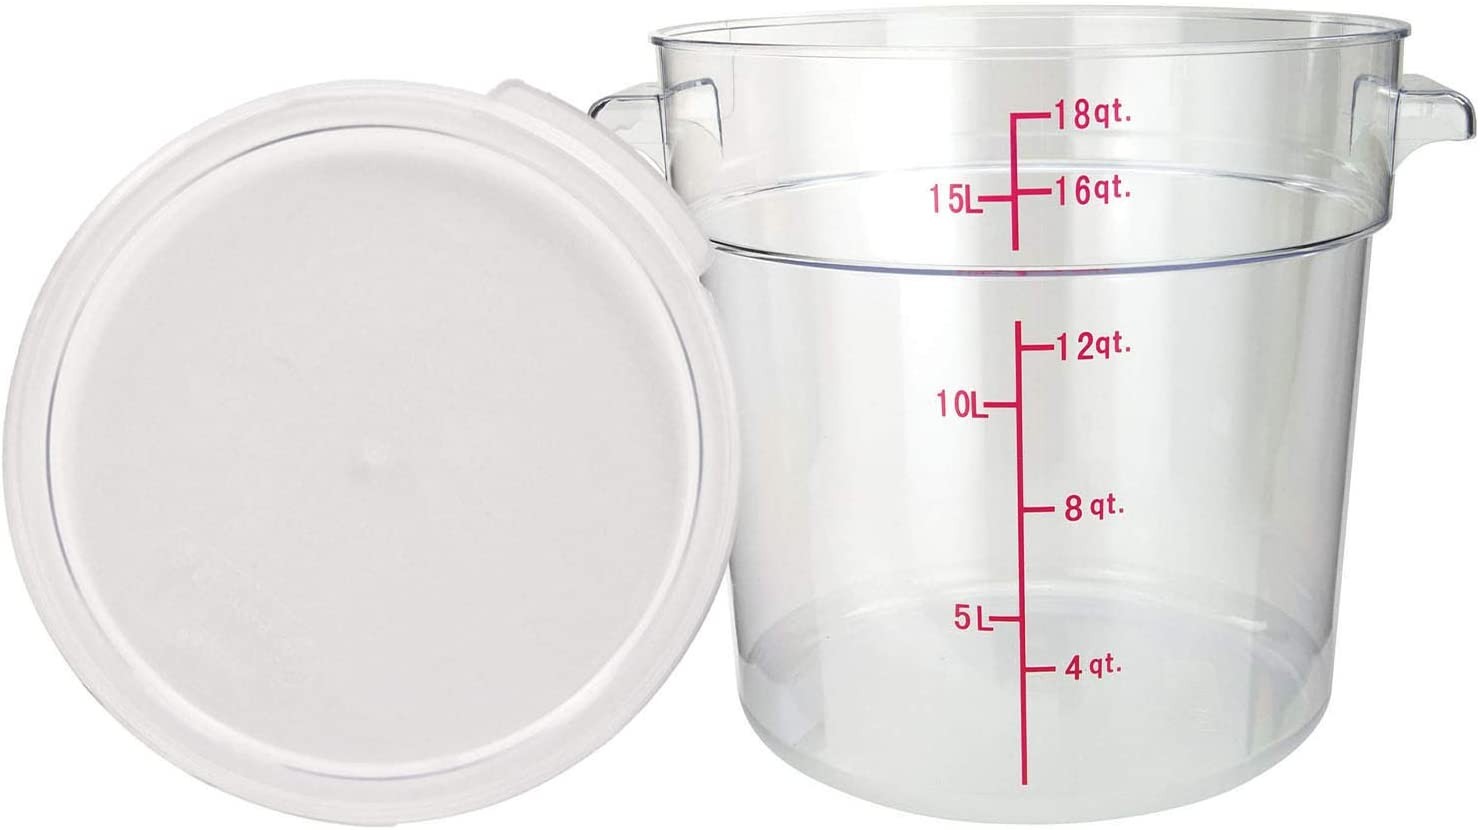 TigerChef Clear Round Polycarbonate Food Storage Container with Clear Lid 18 Qt.